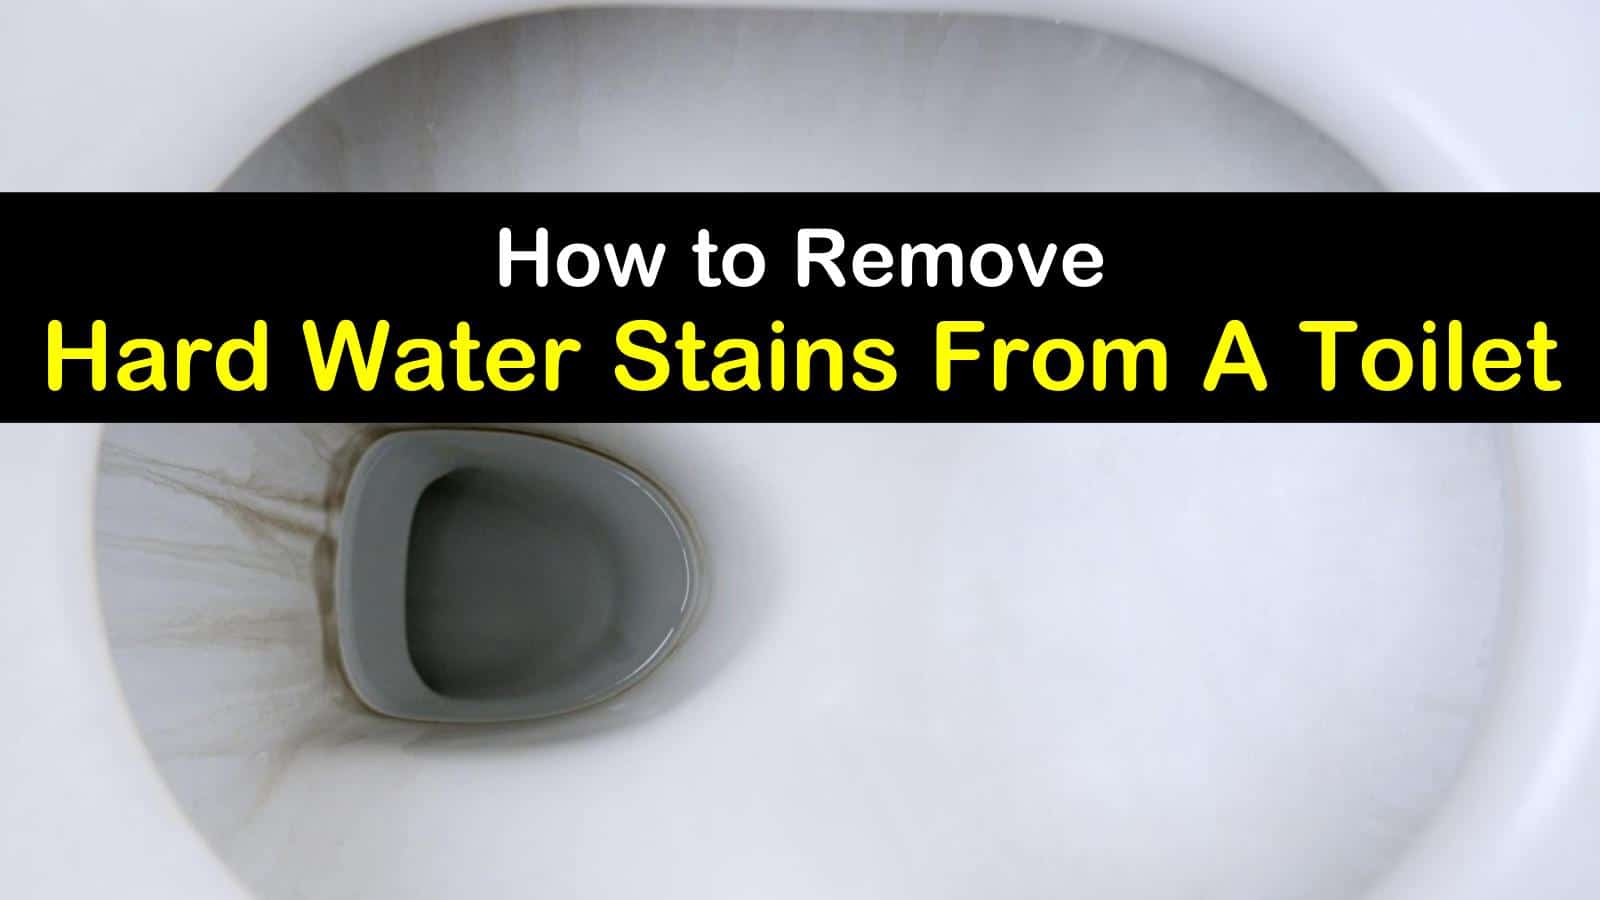 how to remove hard water stains from toilet titleimg1